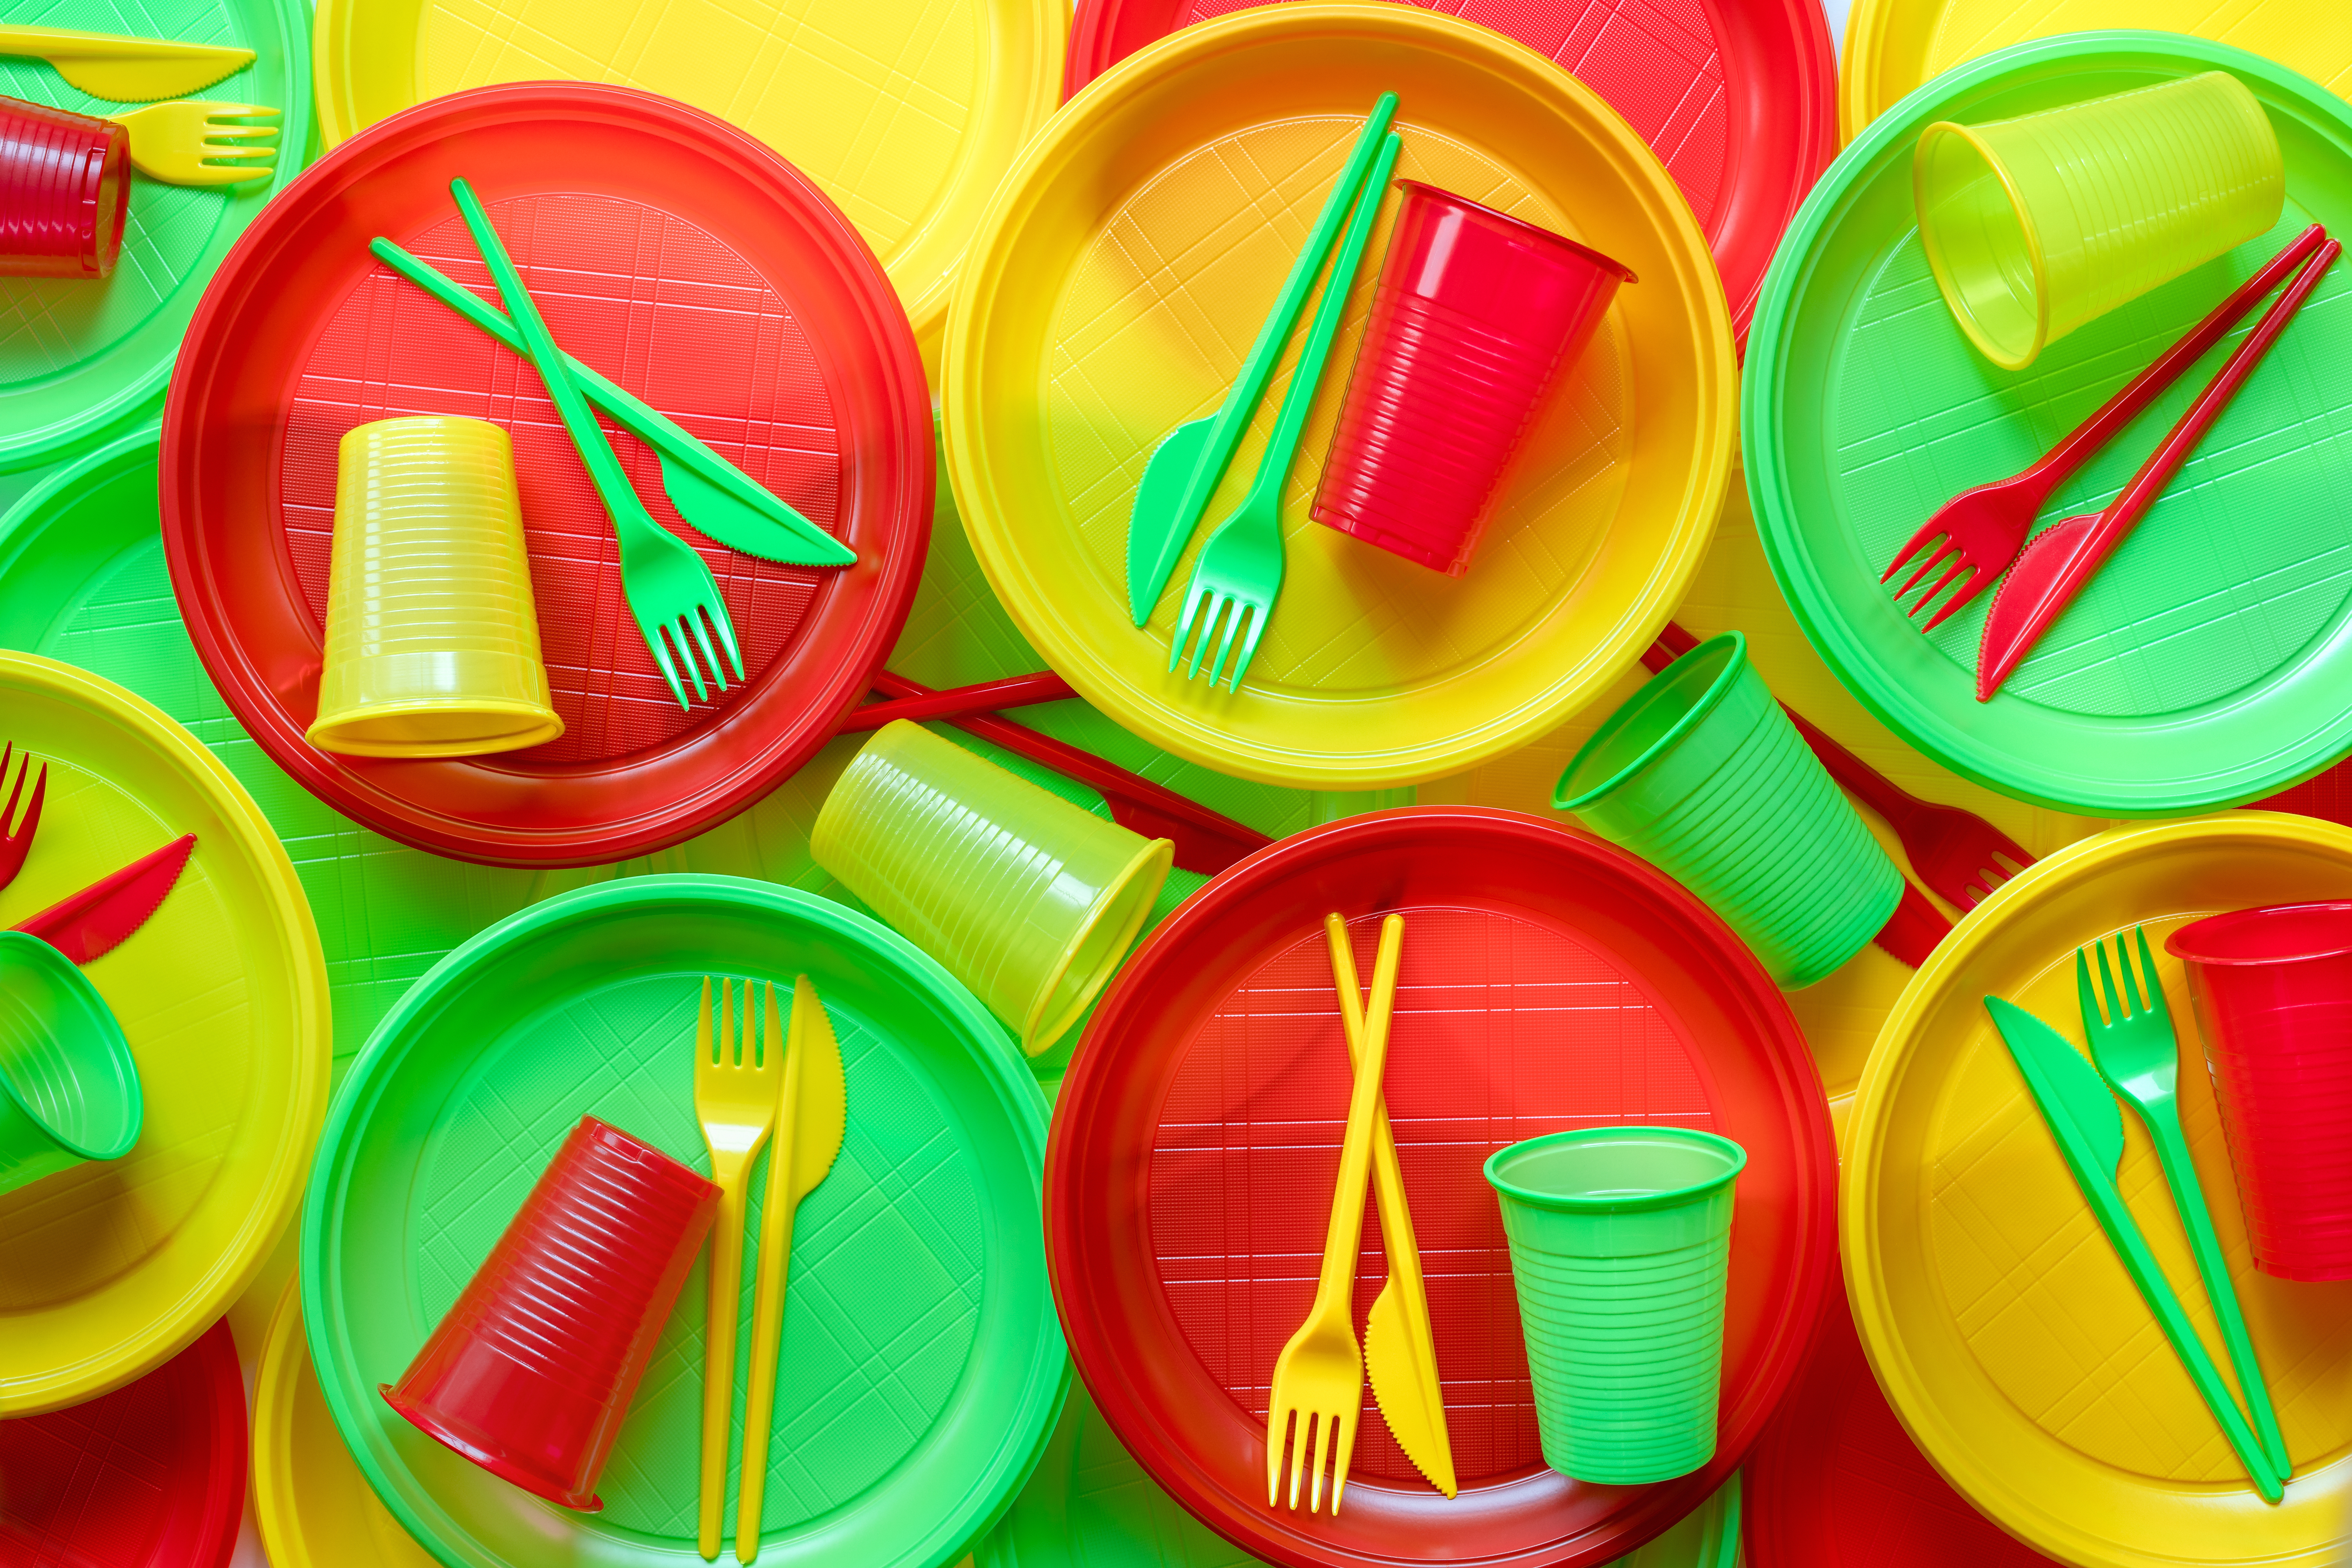 https://stock.adobe.com/br/images/bright-plastic-disposable-tableware-background/215934508